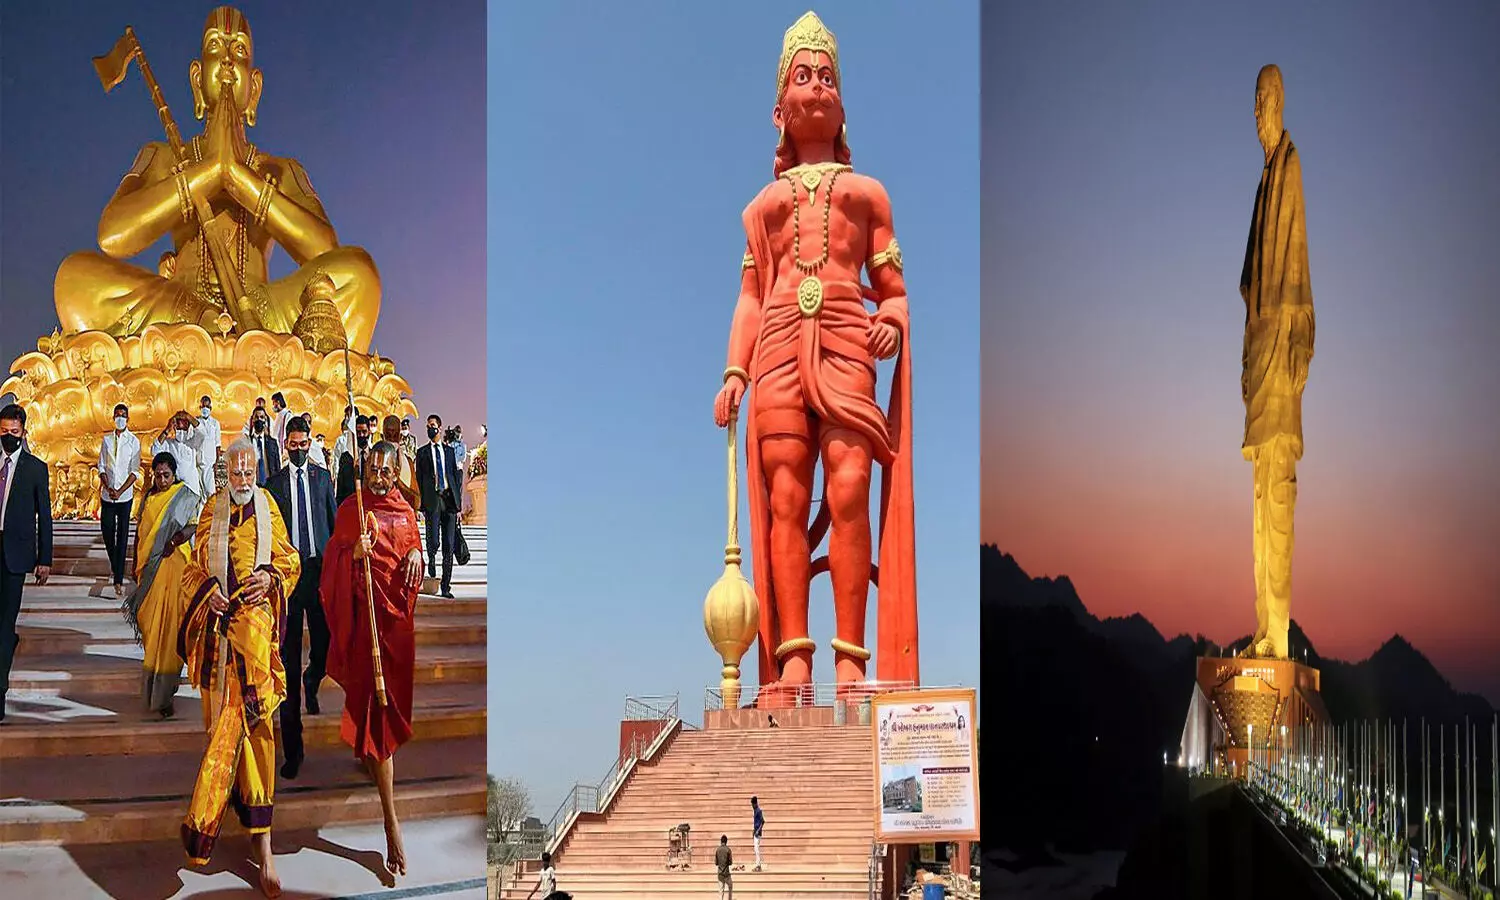 8 years of Modi govt: From Statue of unity to Lord Hanumans statue, Iconic statues unveiled by PM